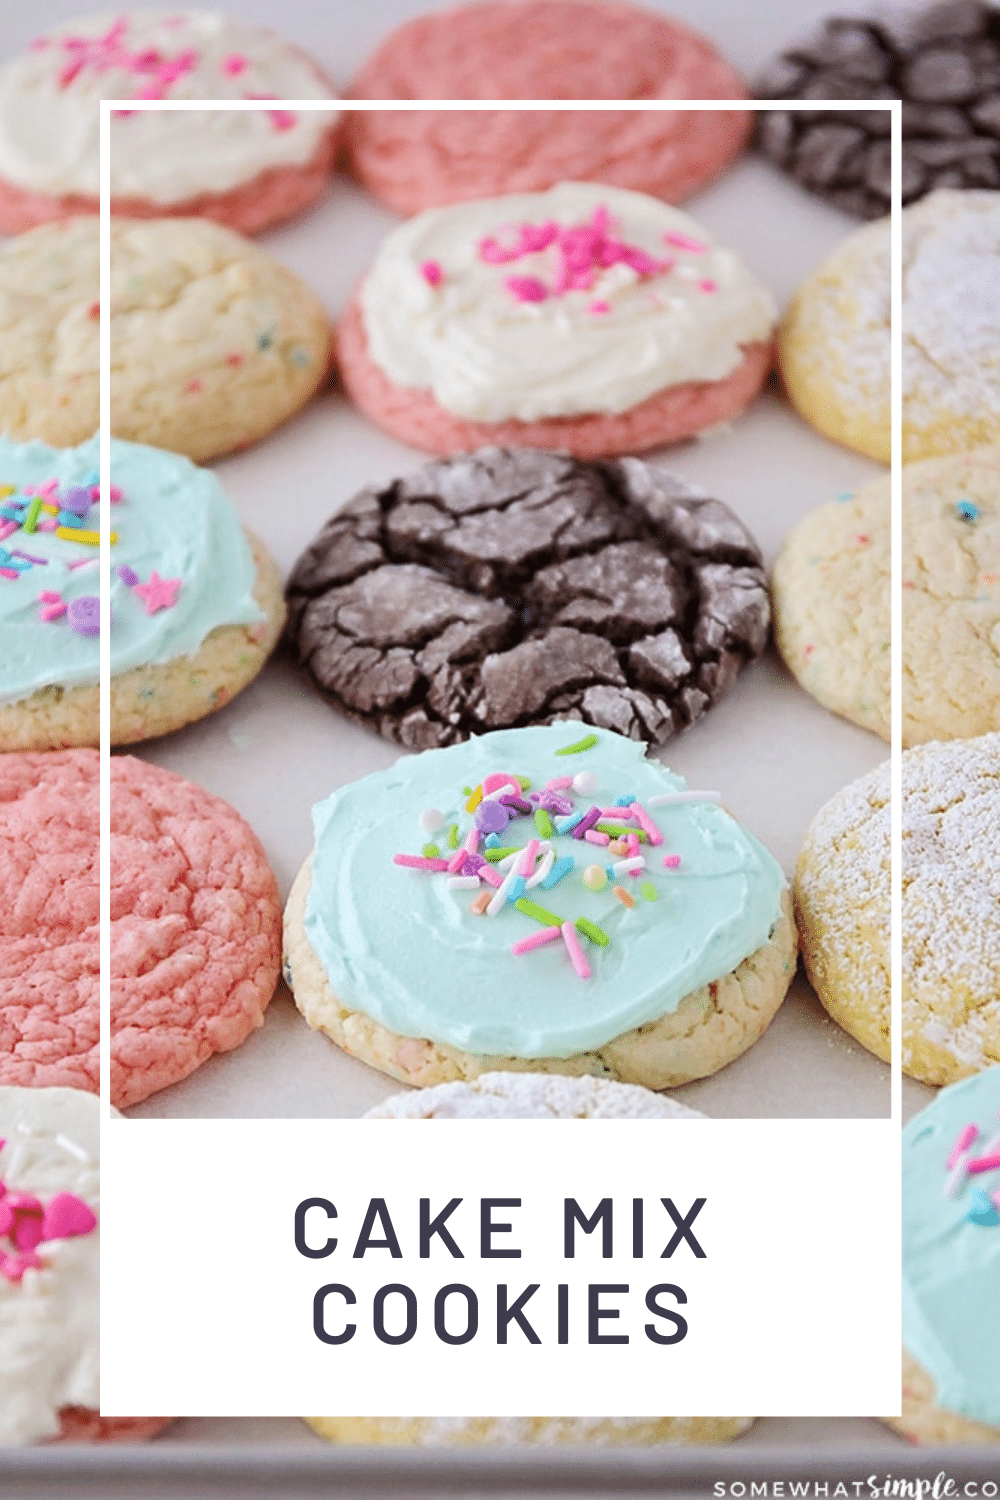 Cake mix cookies are soft and chewy and super delicious! Plus, they only require 3 ingredients making them essentially a no-fuss fantastic treat. This cookie recipe is so easy, it'll look and taste like you've been in the kitchen all day but they will only take you minutes to make. With 10 different flavors to choose from, you're going to find one you love! via @somewhatsimple